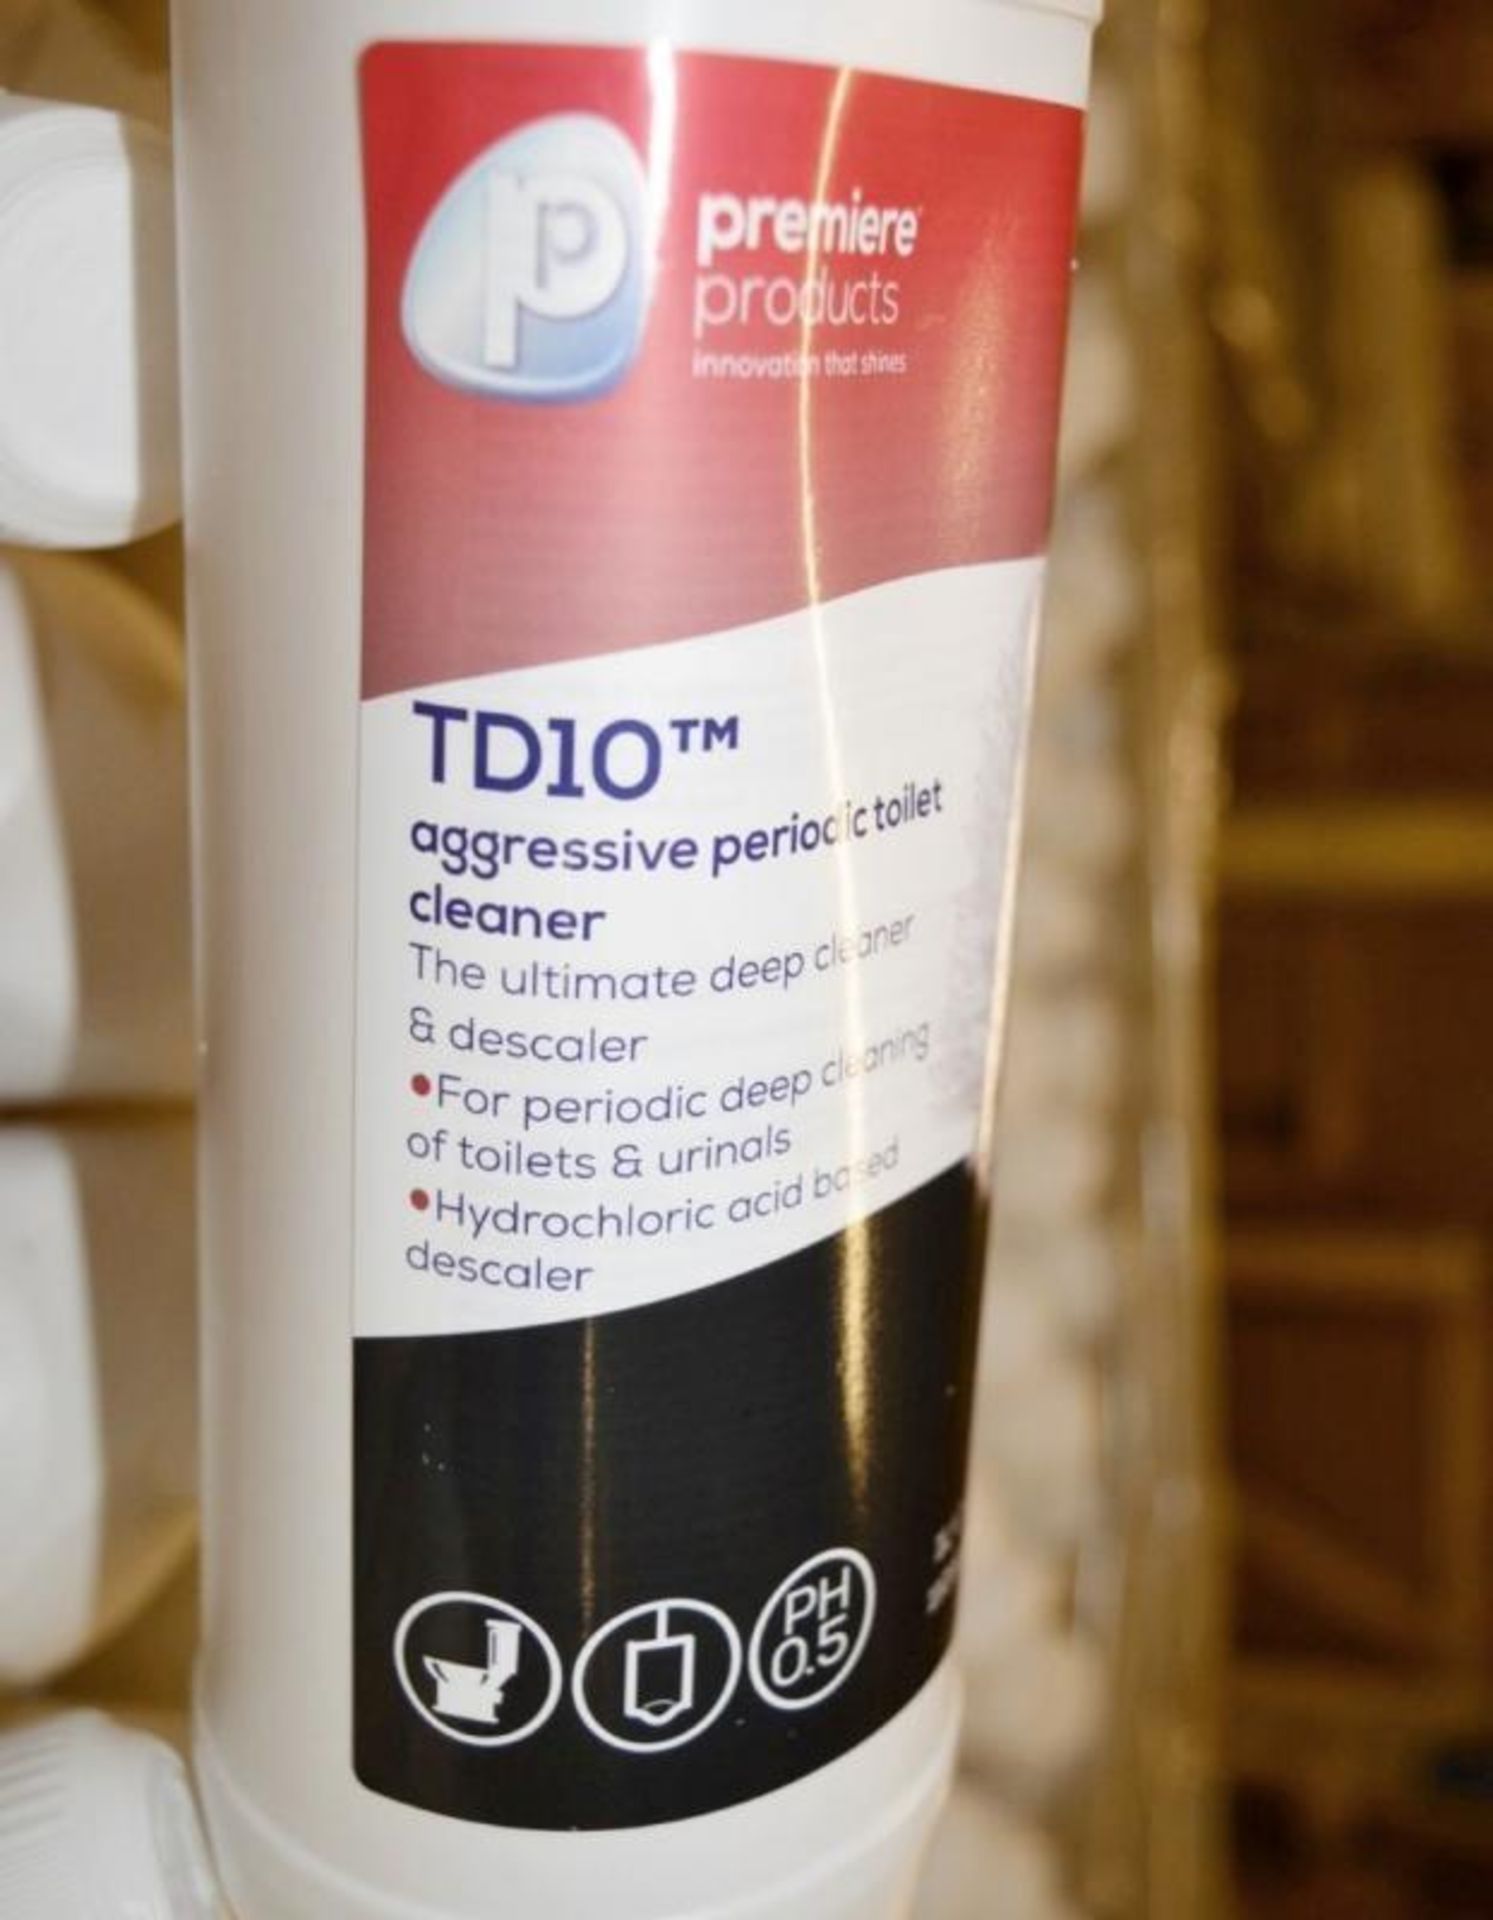 6 x Premier Products TD10 Aggressive Periodic Toilet Cleaner - 1 Litre Bottles - Hydrochloric Acid B - Image 2 of 2